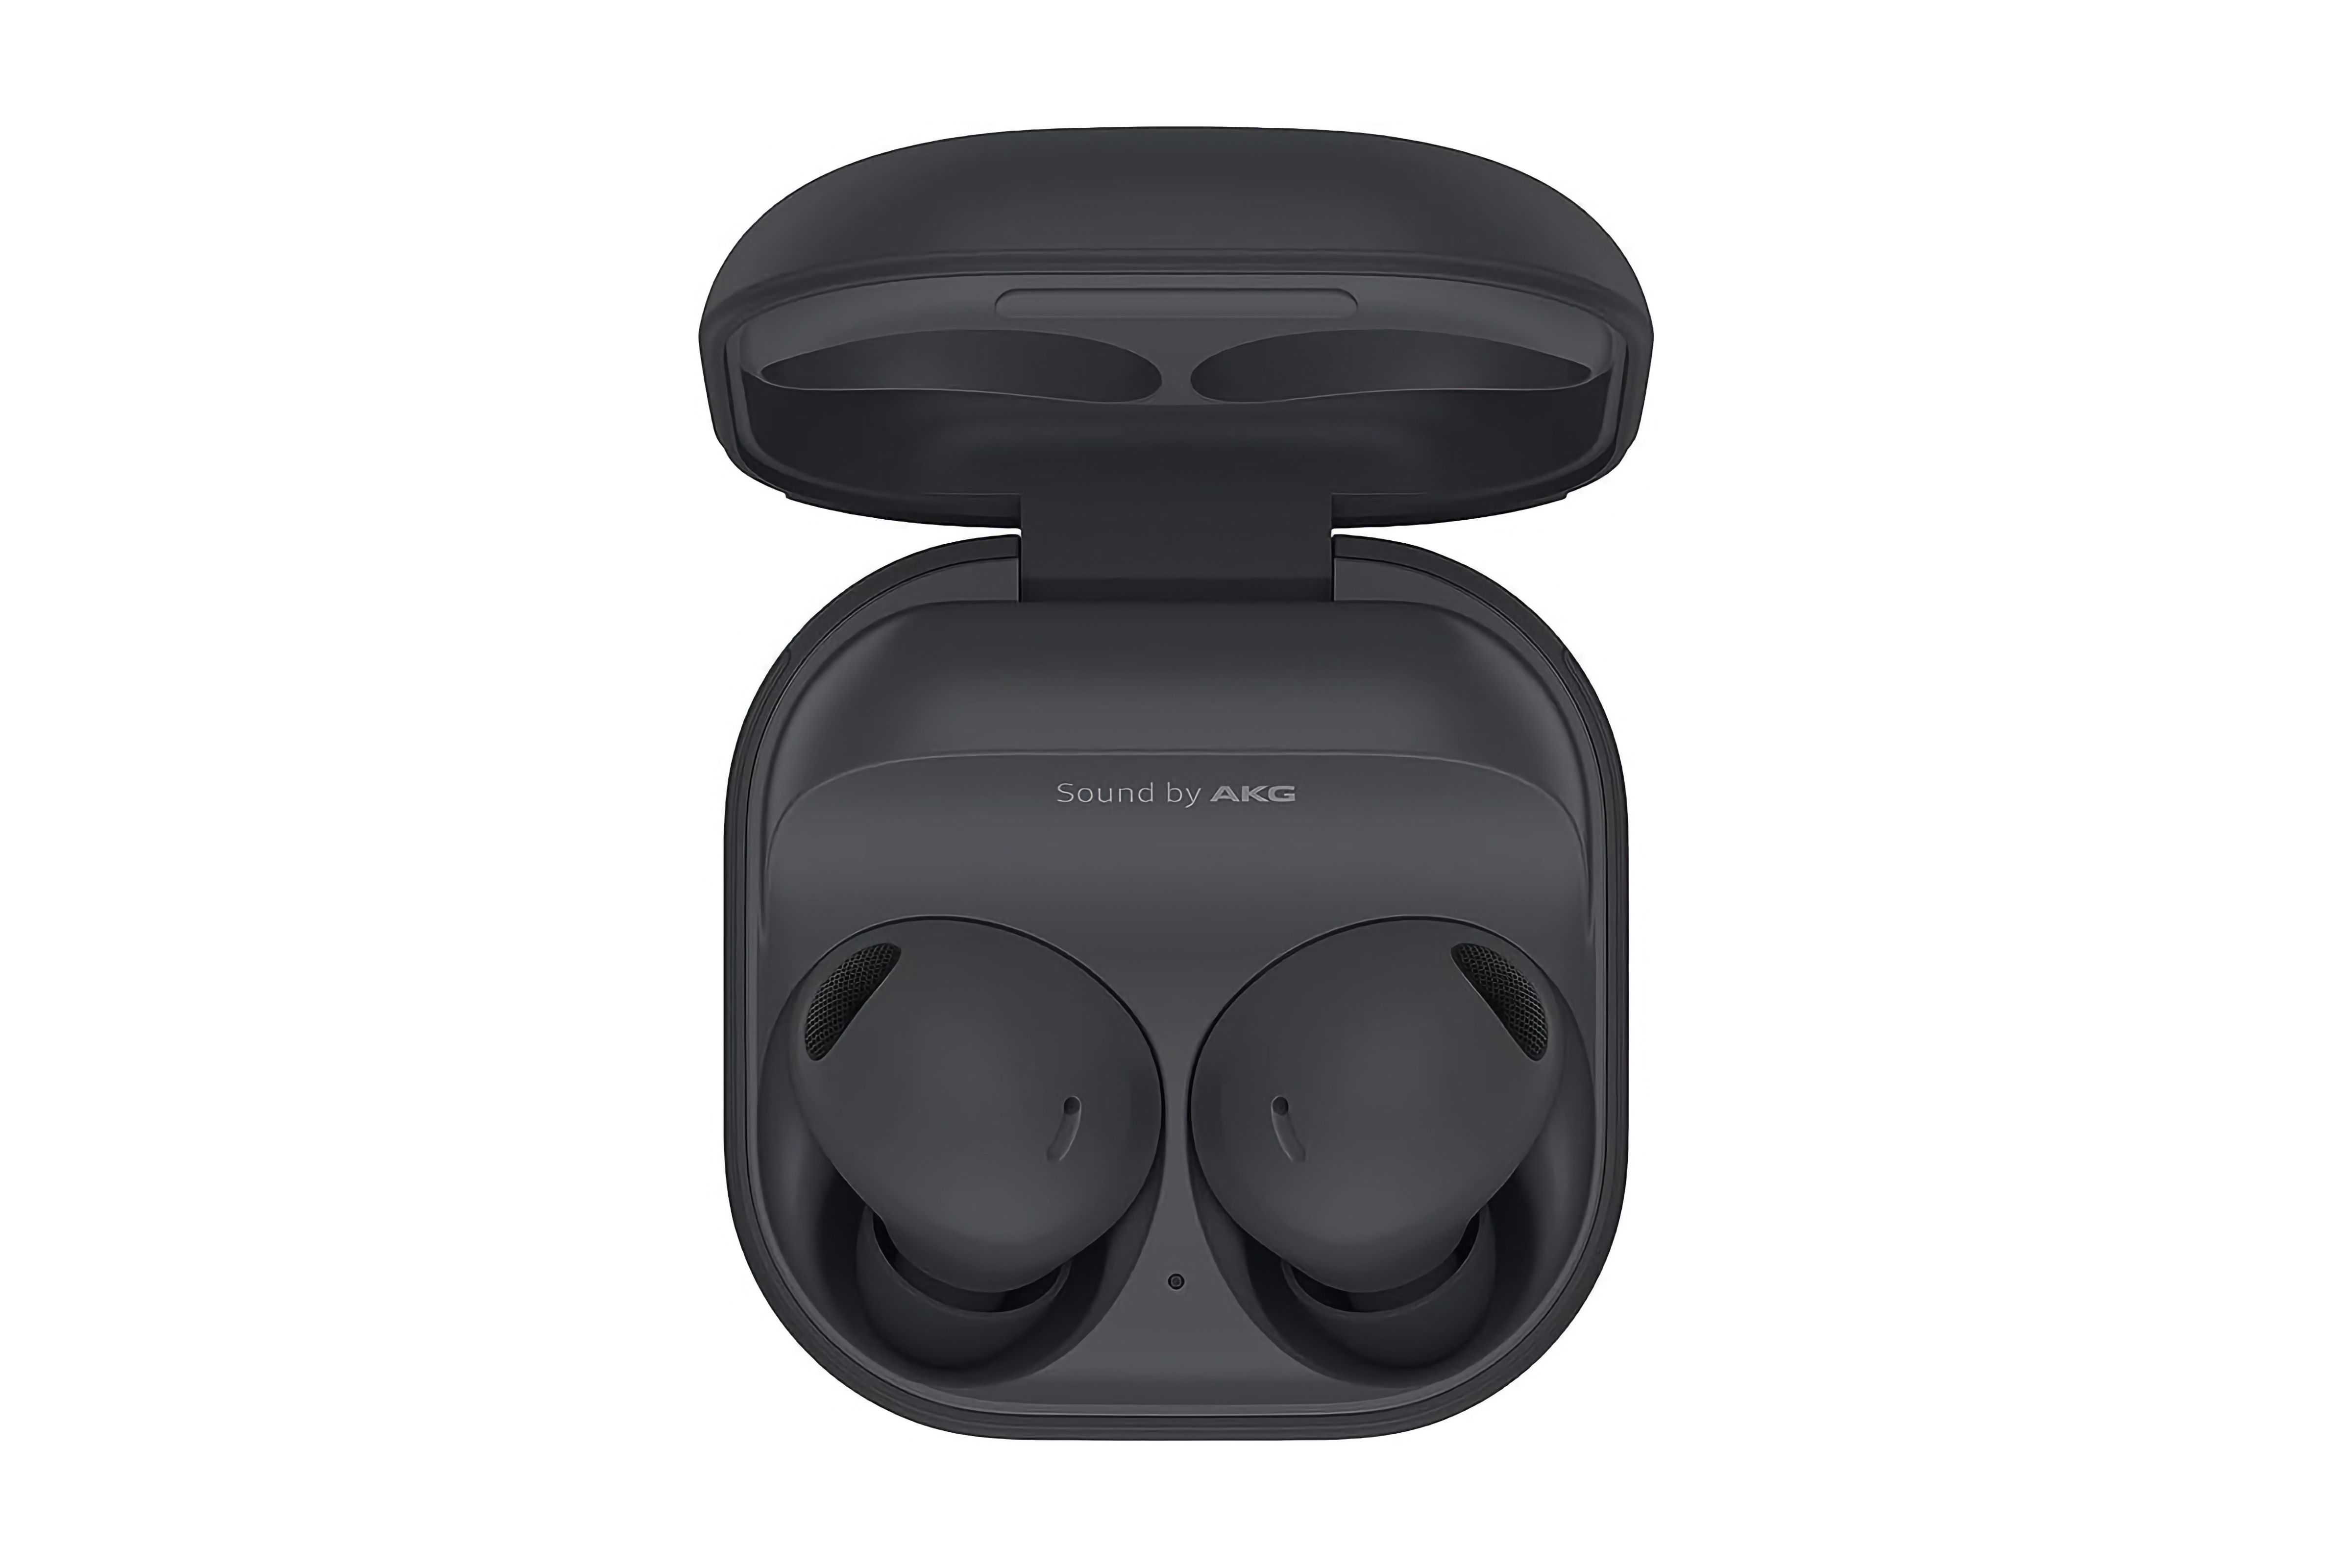 Black earbuds in an open charging case.